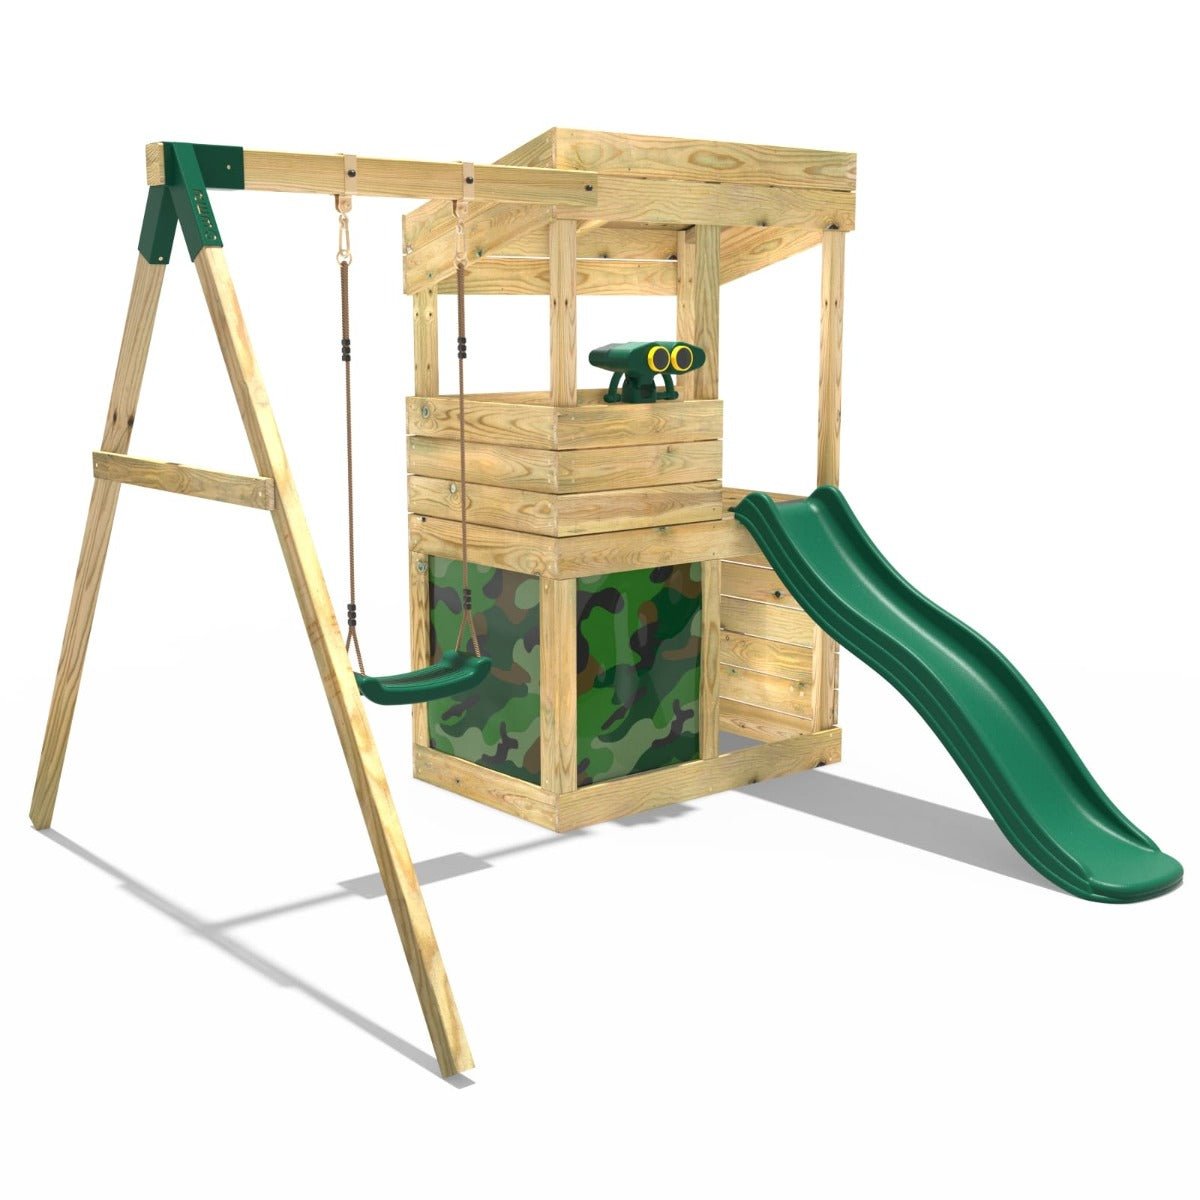 Rebo Wooden Lookout Tower Playhouse with 6ft Slide & Swing - Yellowstone Camouflage